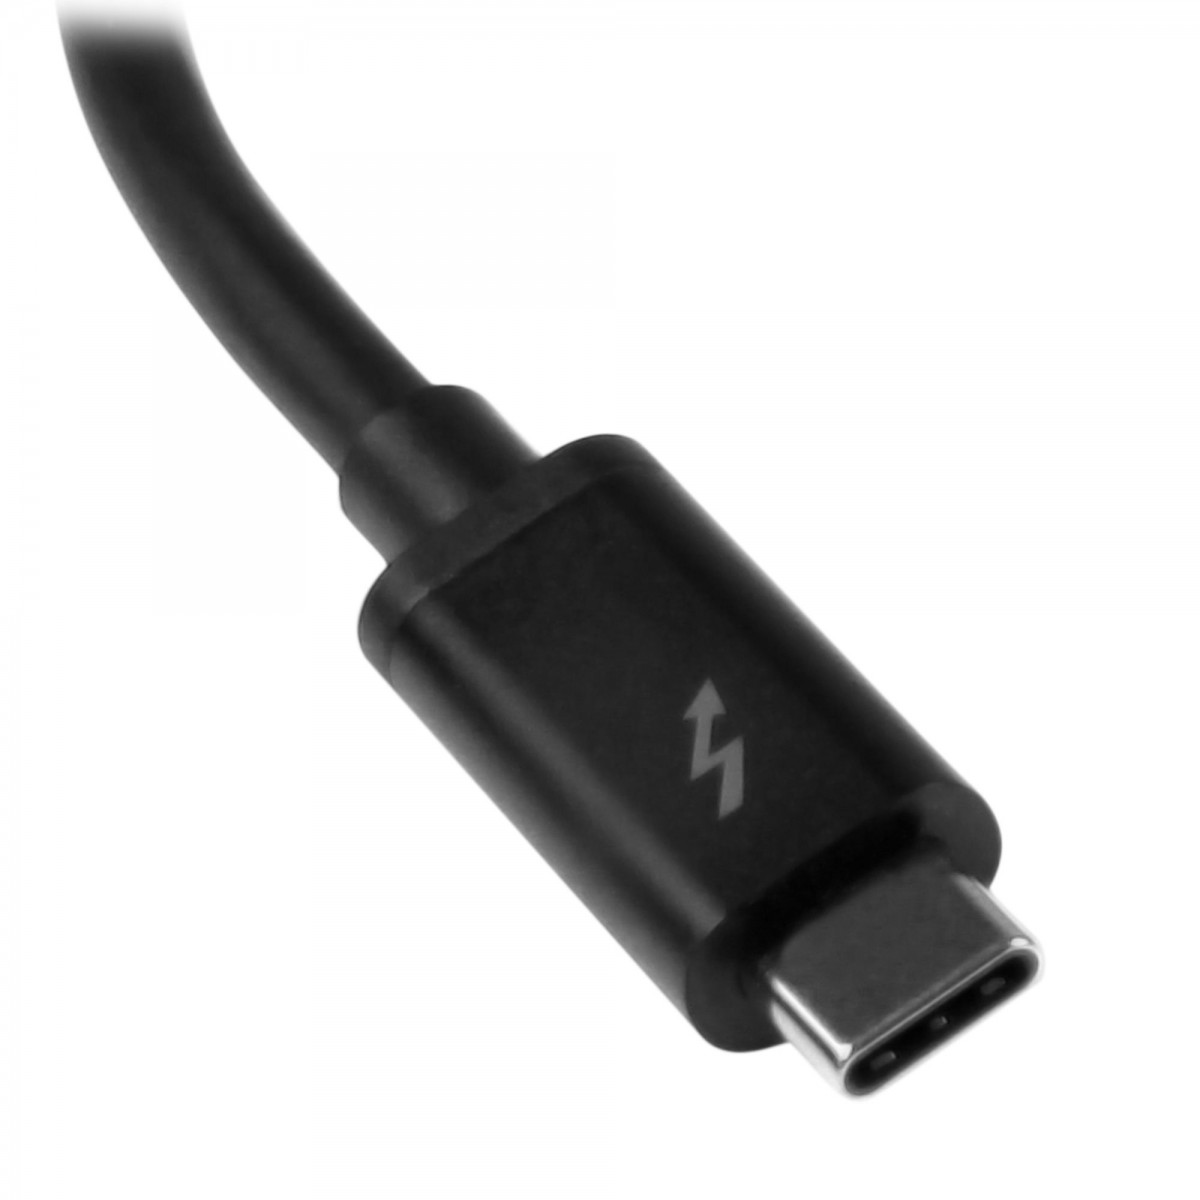 StarTech.com Thunderbolt 3 to Thunderbolt 2 Adapter - TB3 Laptop to TB2 Displays  Devices - Thunderbolt 2 20Gbps or Thunderbolt 